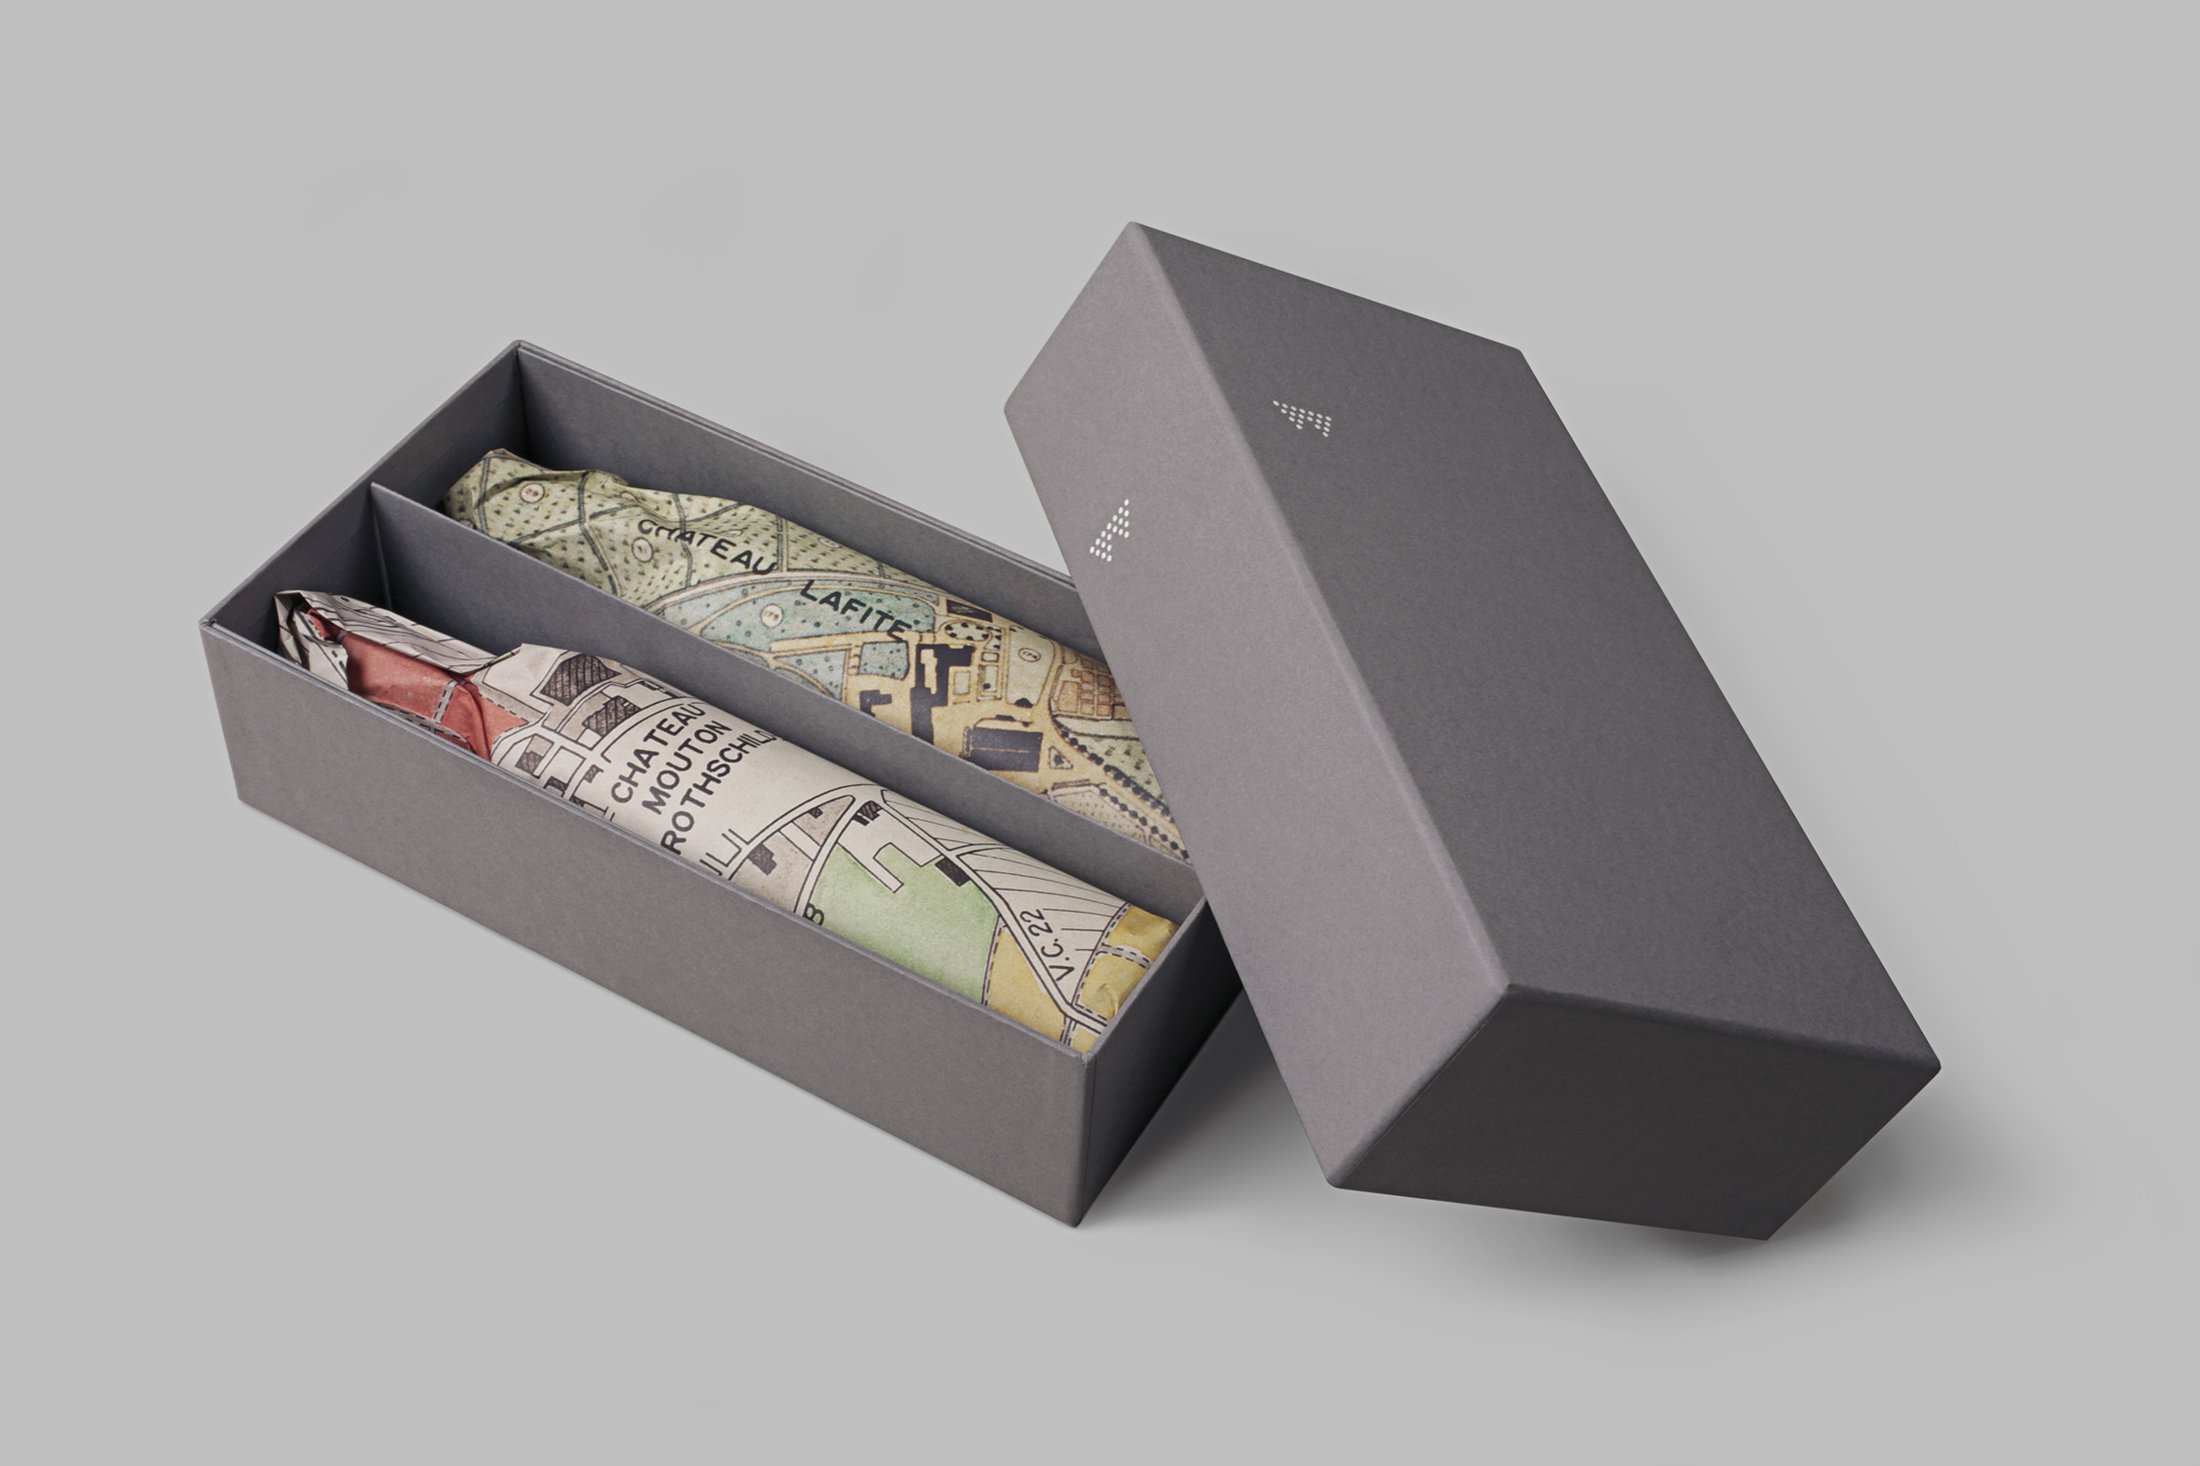 Presentation box including our branding for Waddesdon Wine.